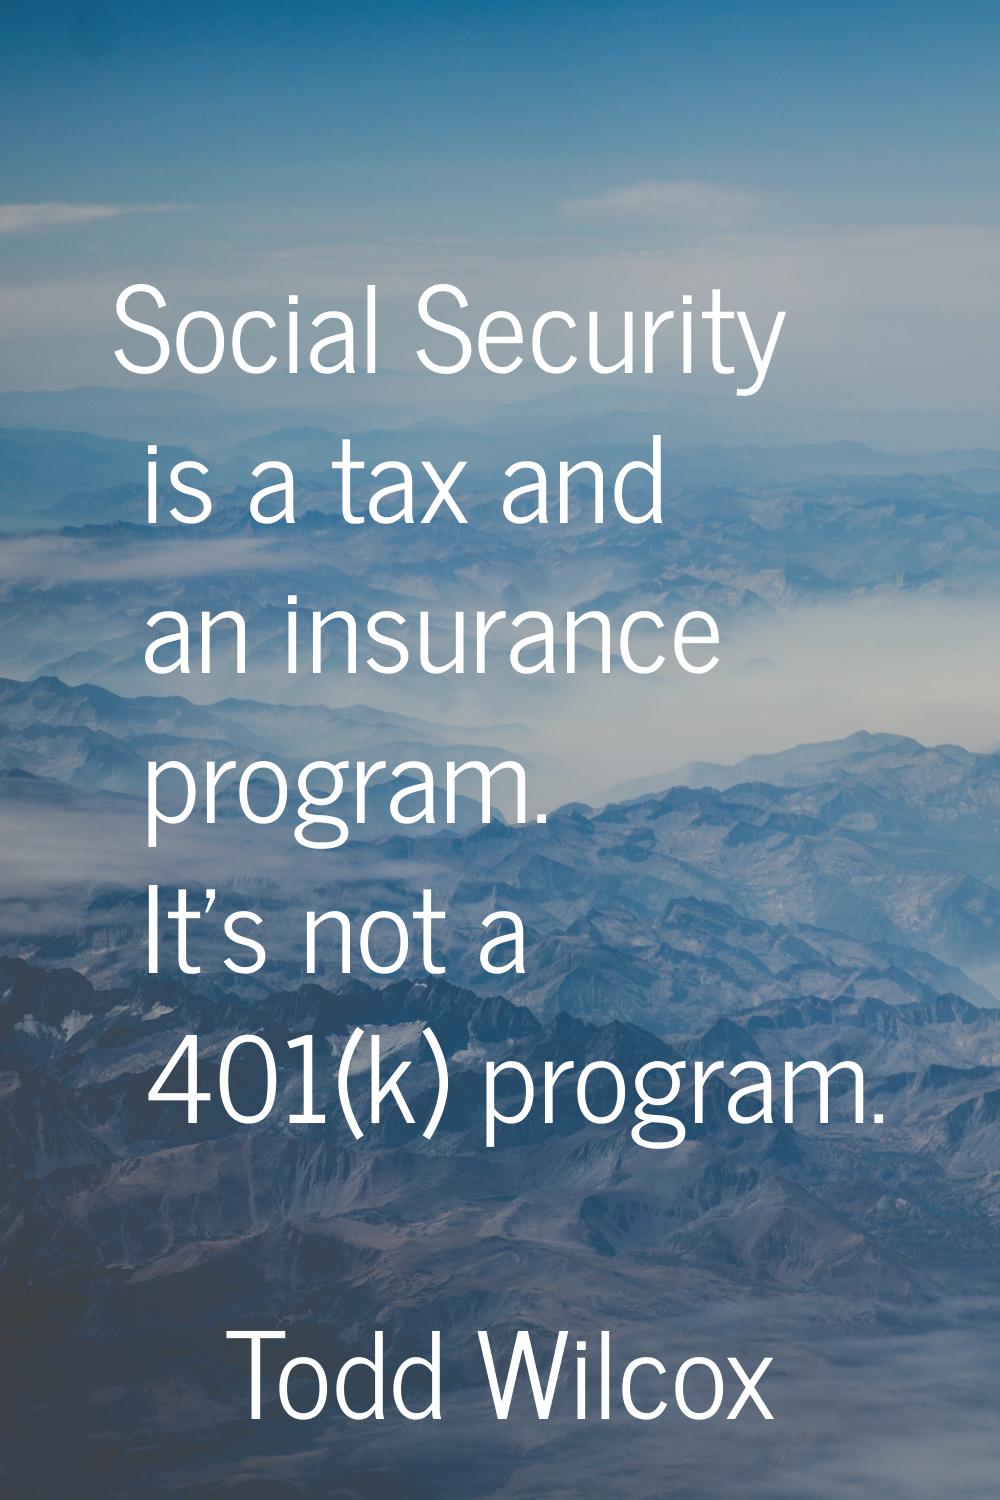 Social Security is a tax and an insurance program. It's not a 401(k) program.